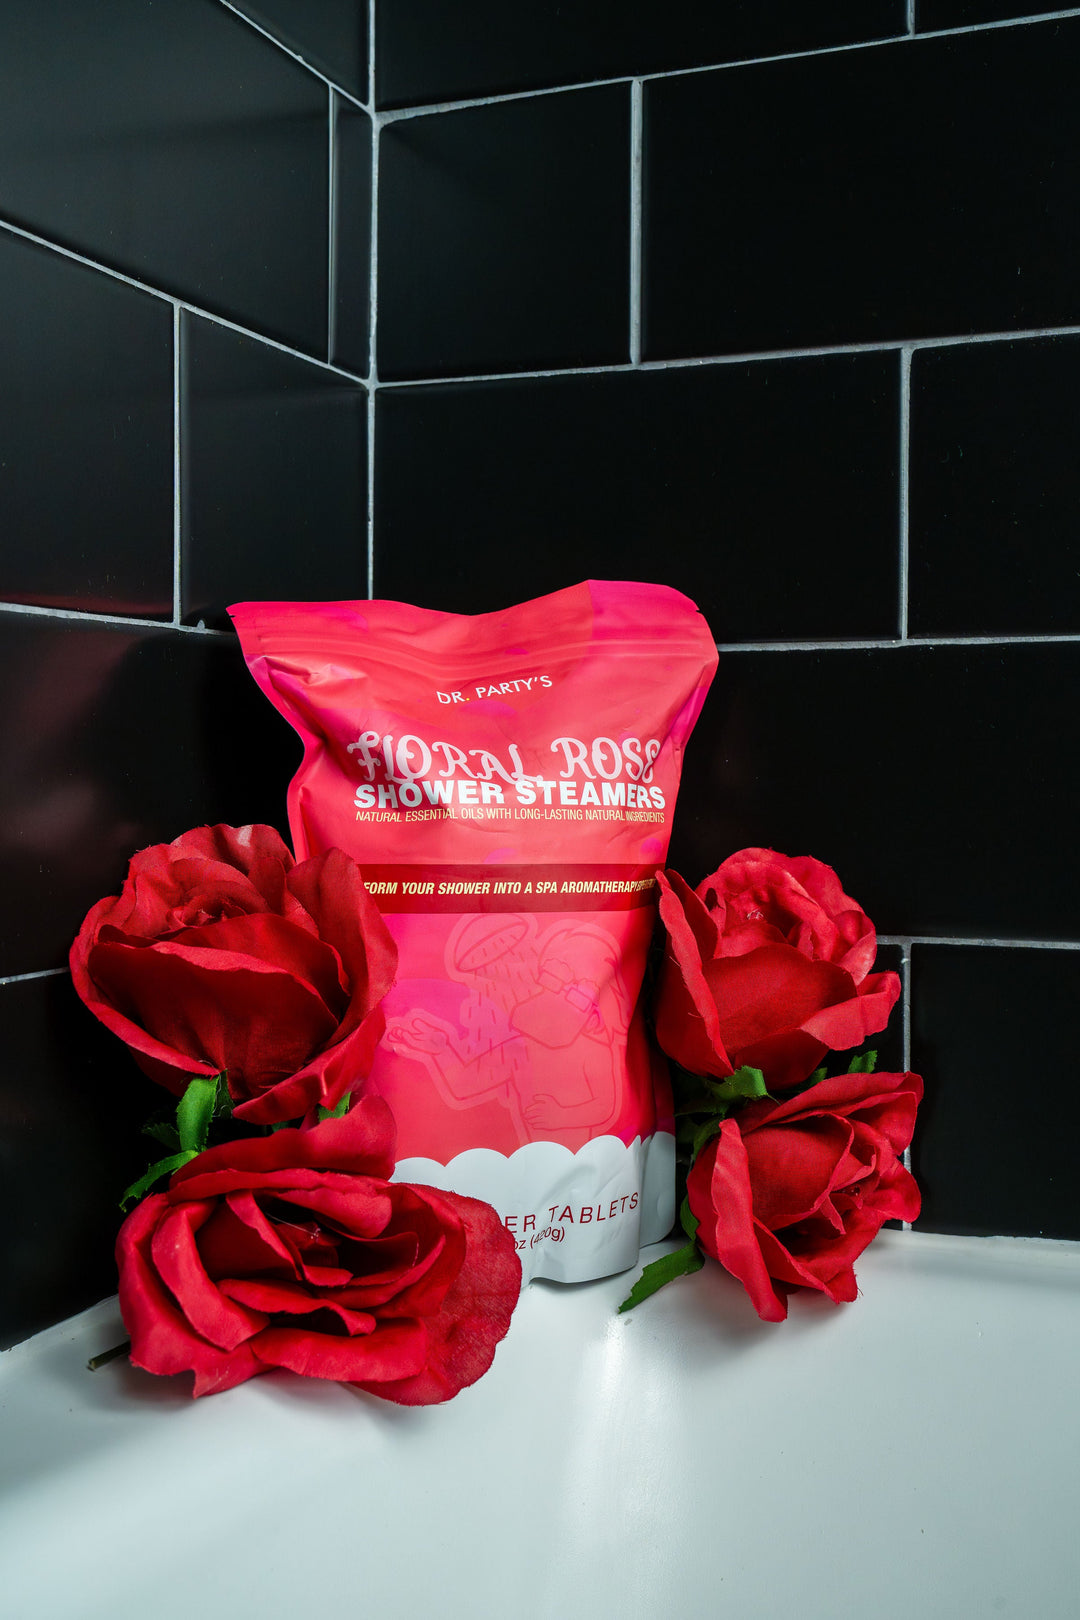 Our floral rose shower steamers infuse your shower with the scent of fresh blossoms, turning the ordinary into a spa-like sanctuary with each 14-tablet pack.